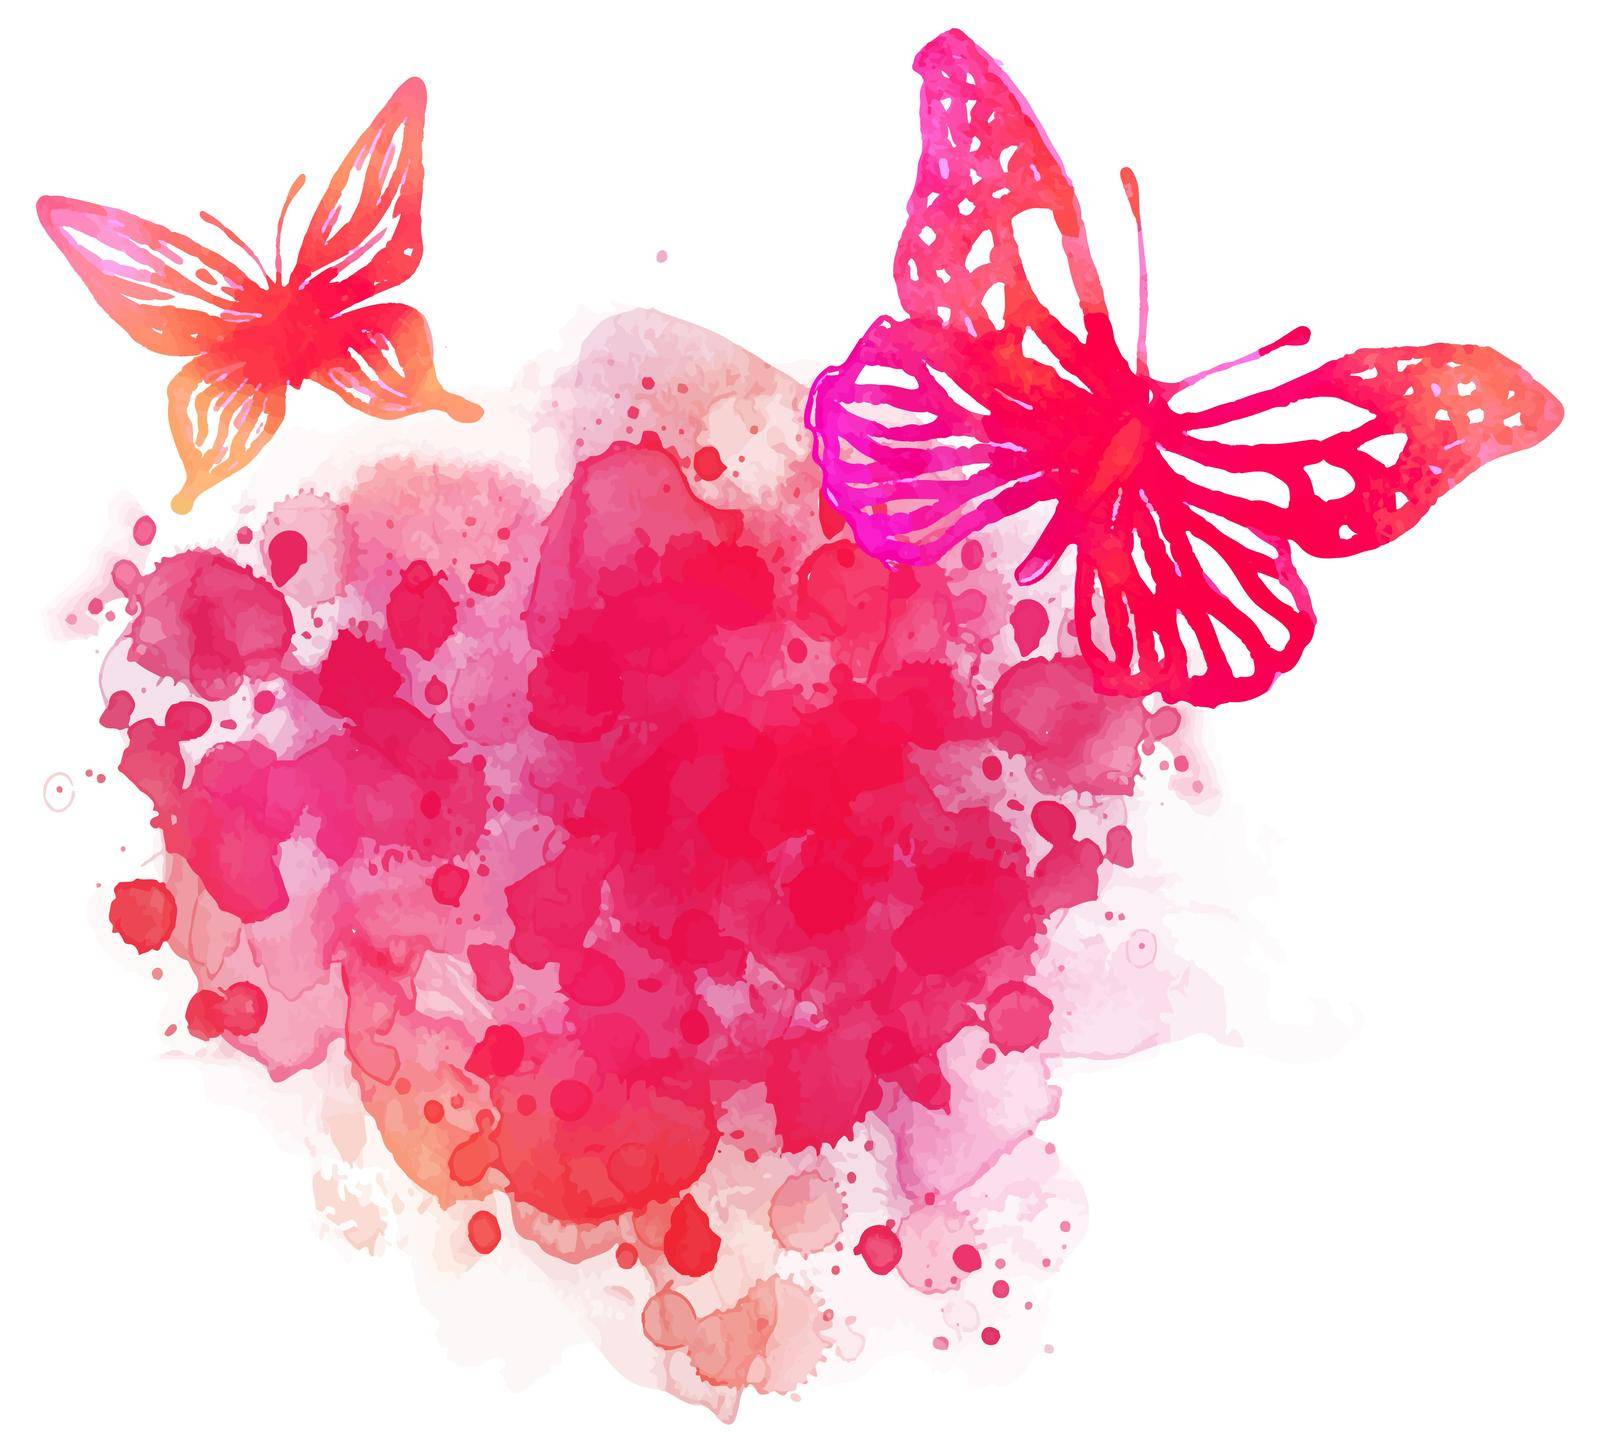 Amazing watercolor background with butterfly. Vector art isolated on white